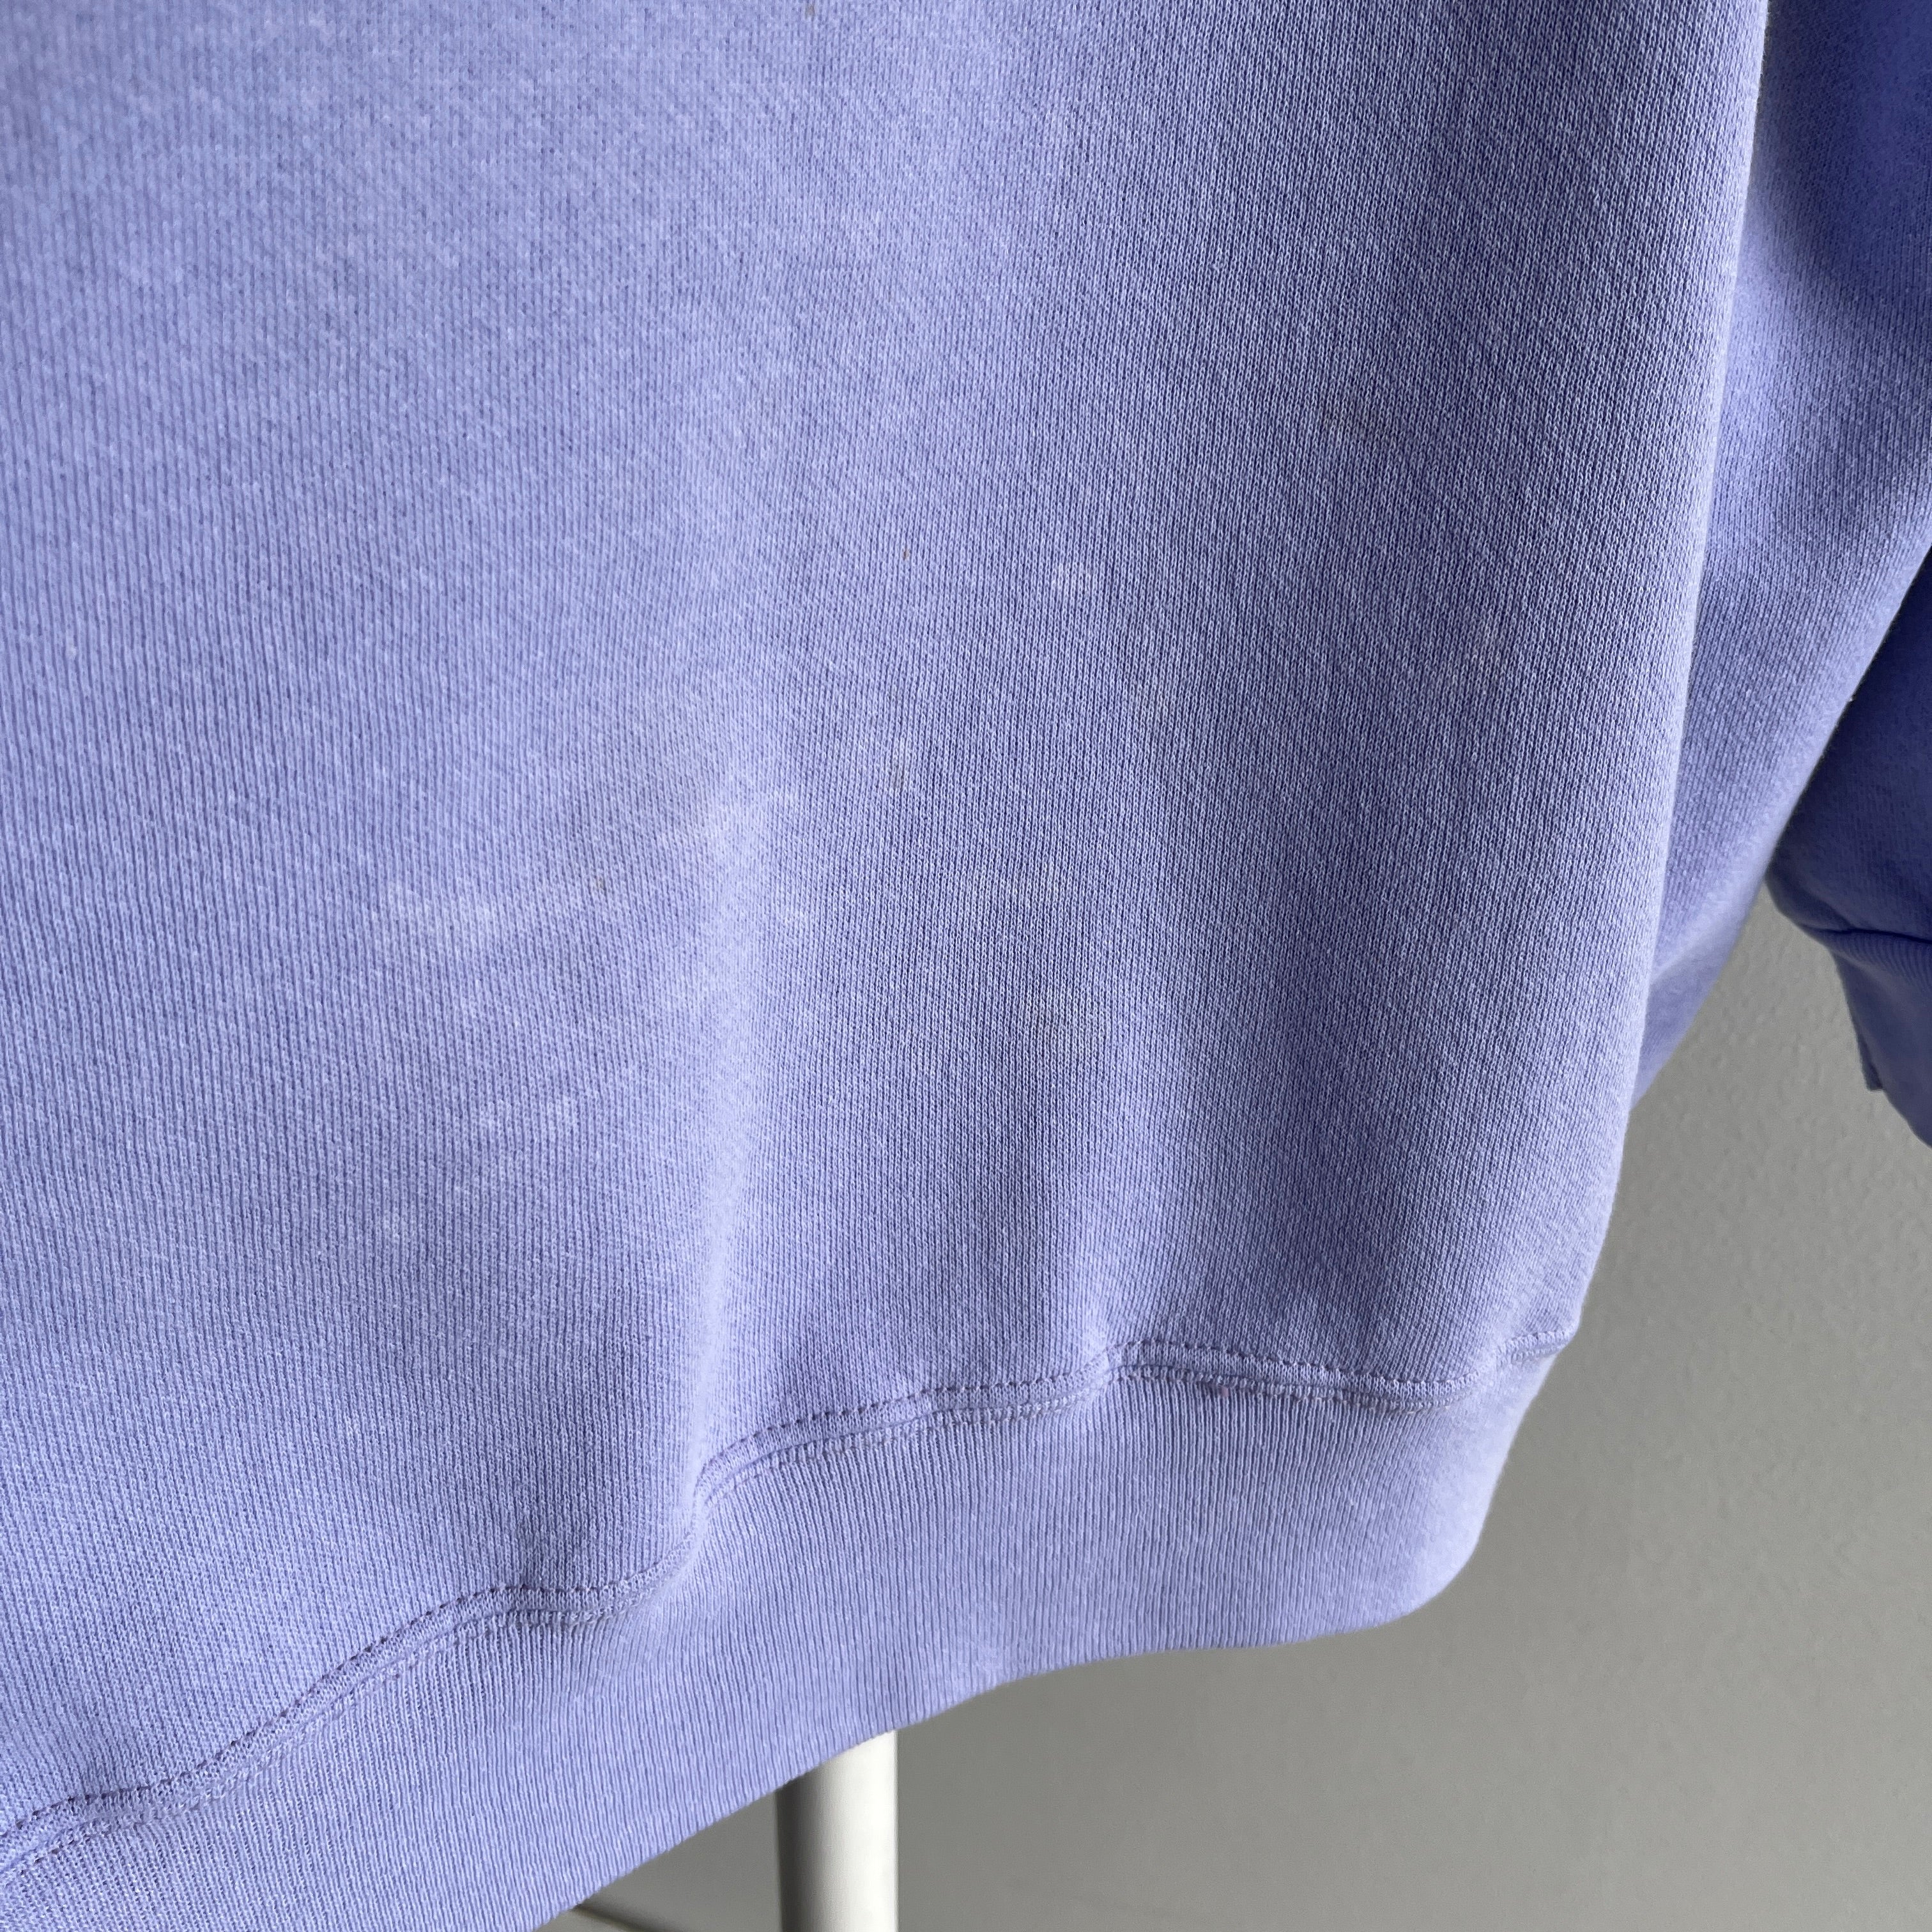 1980s Faded Lavender Relaxed Fit Sweatshirt - Swoon